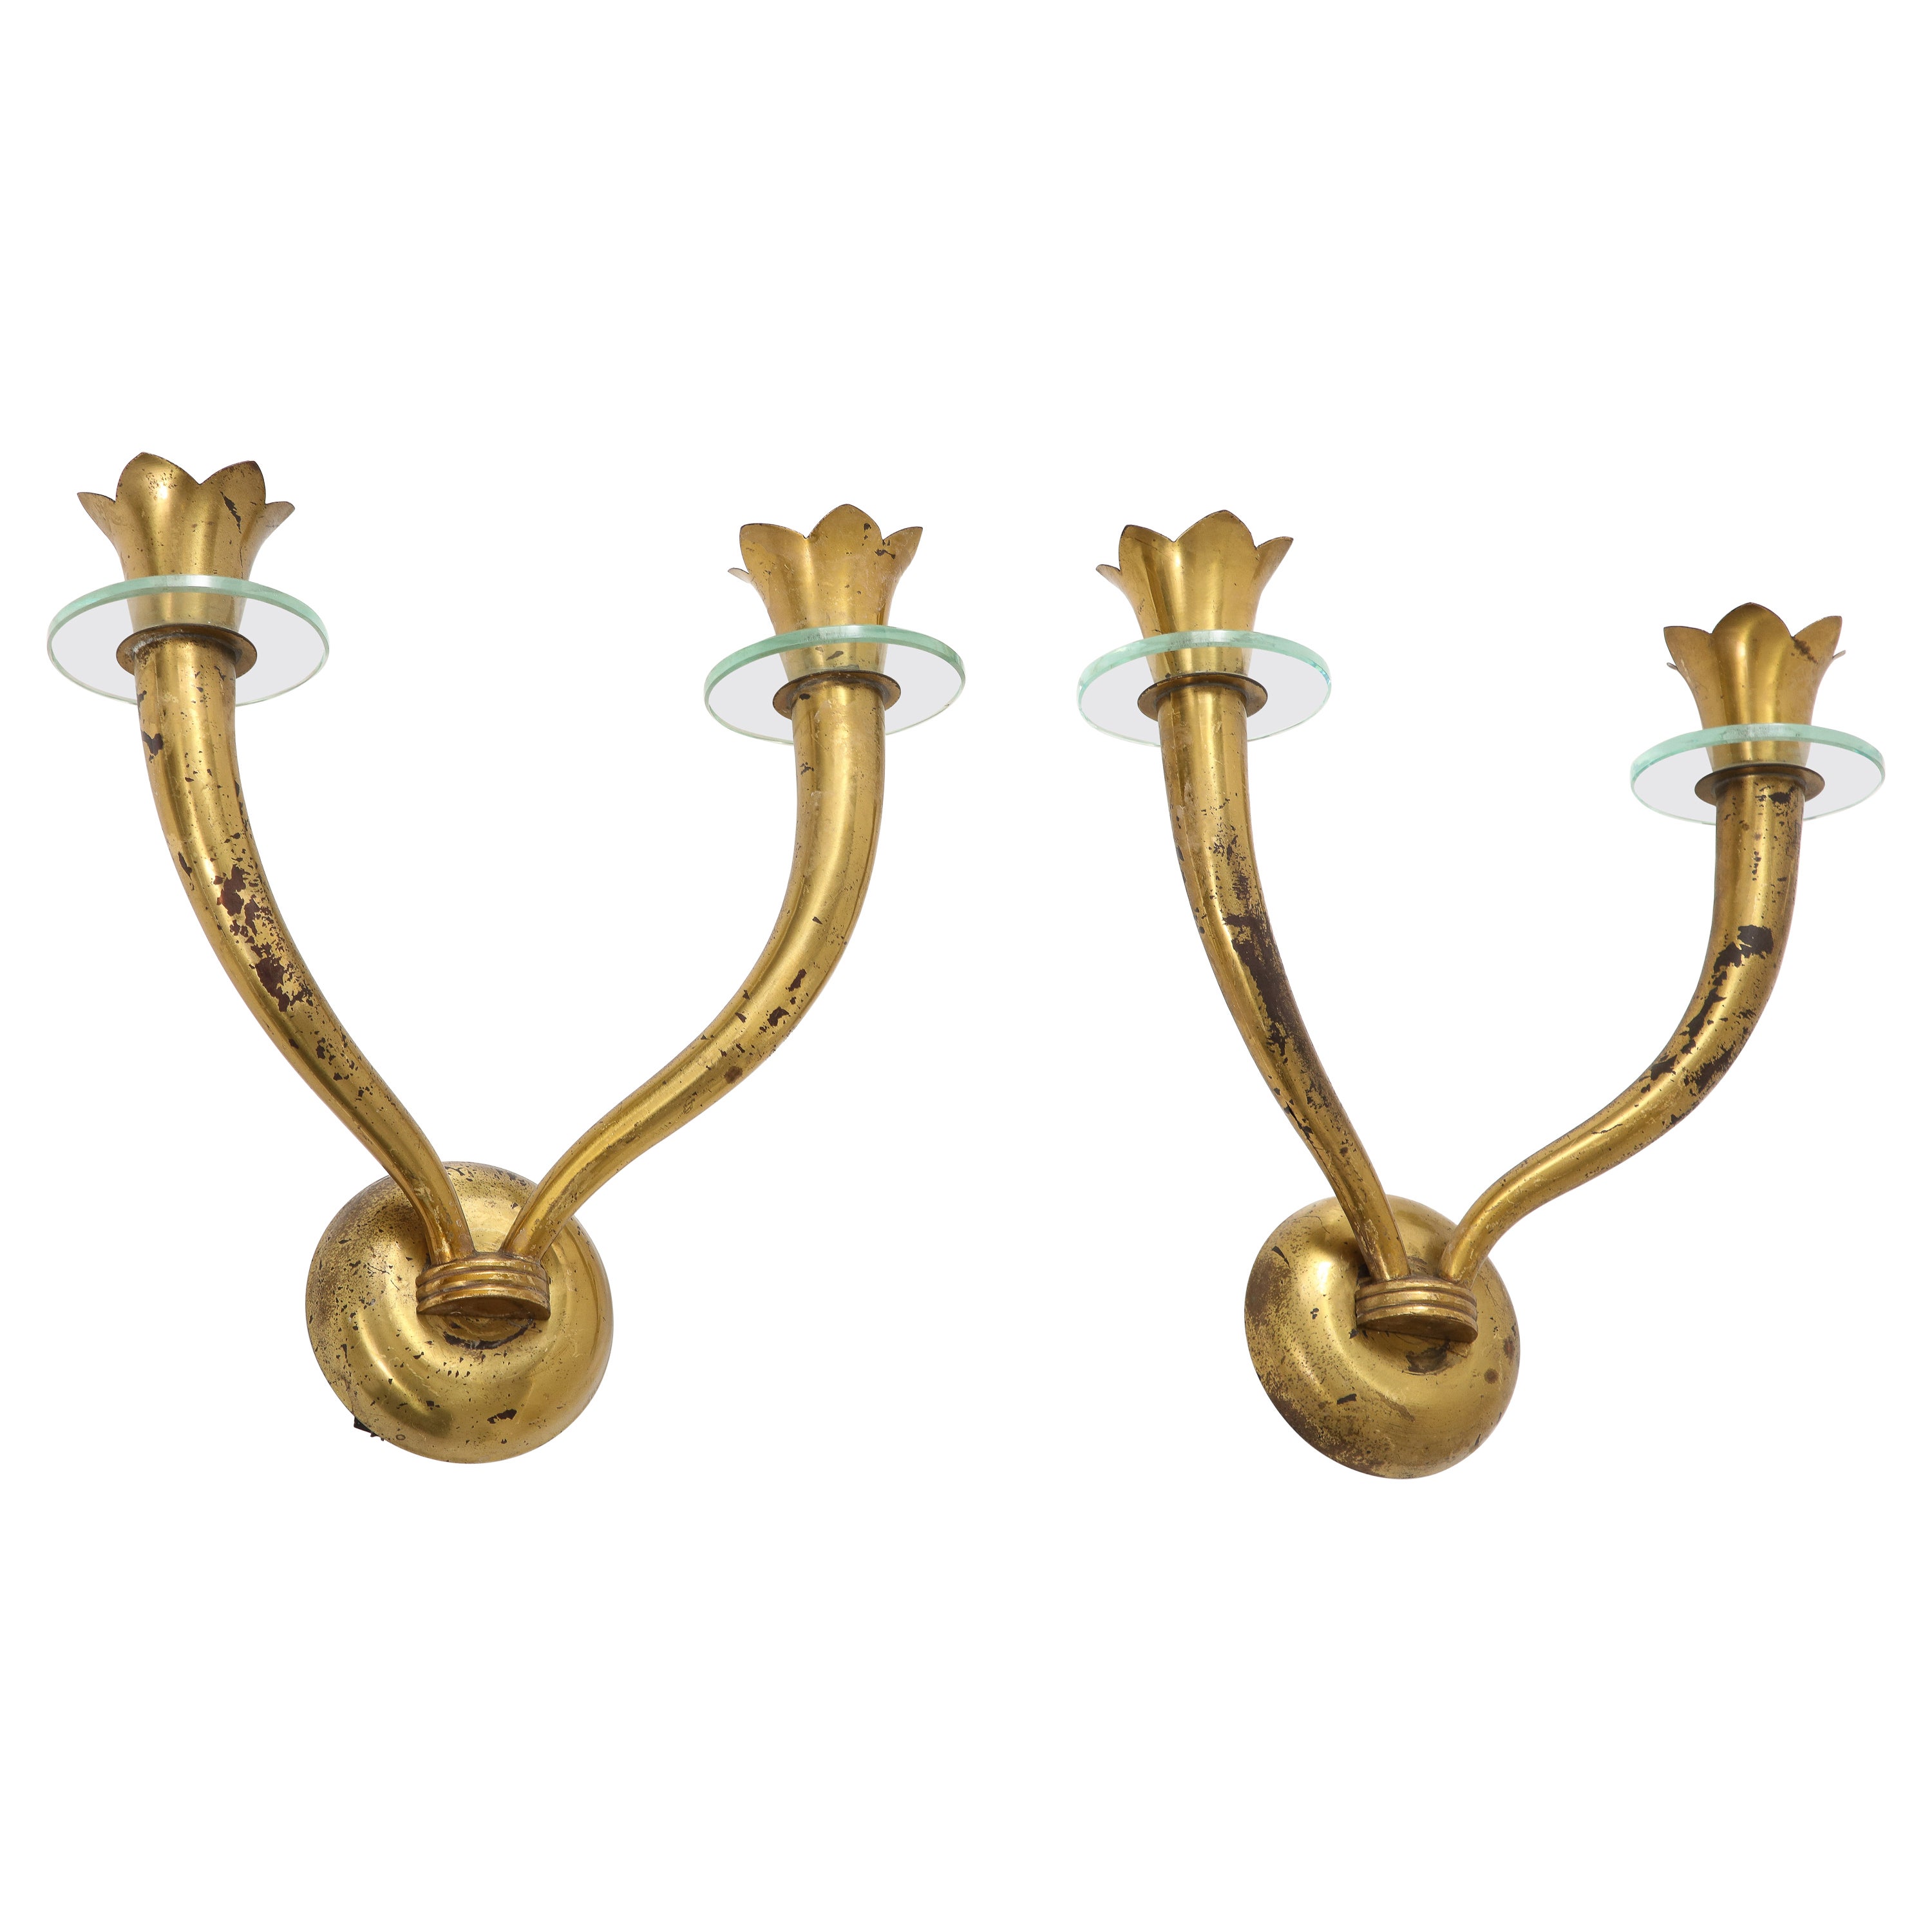 Pair of Brass and Glass Modernist Sconces Att. Emilio Lancia - Italy 1950s For Sale